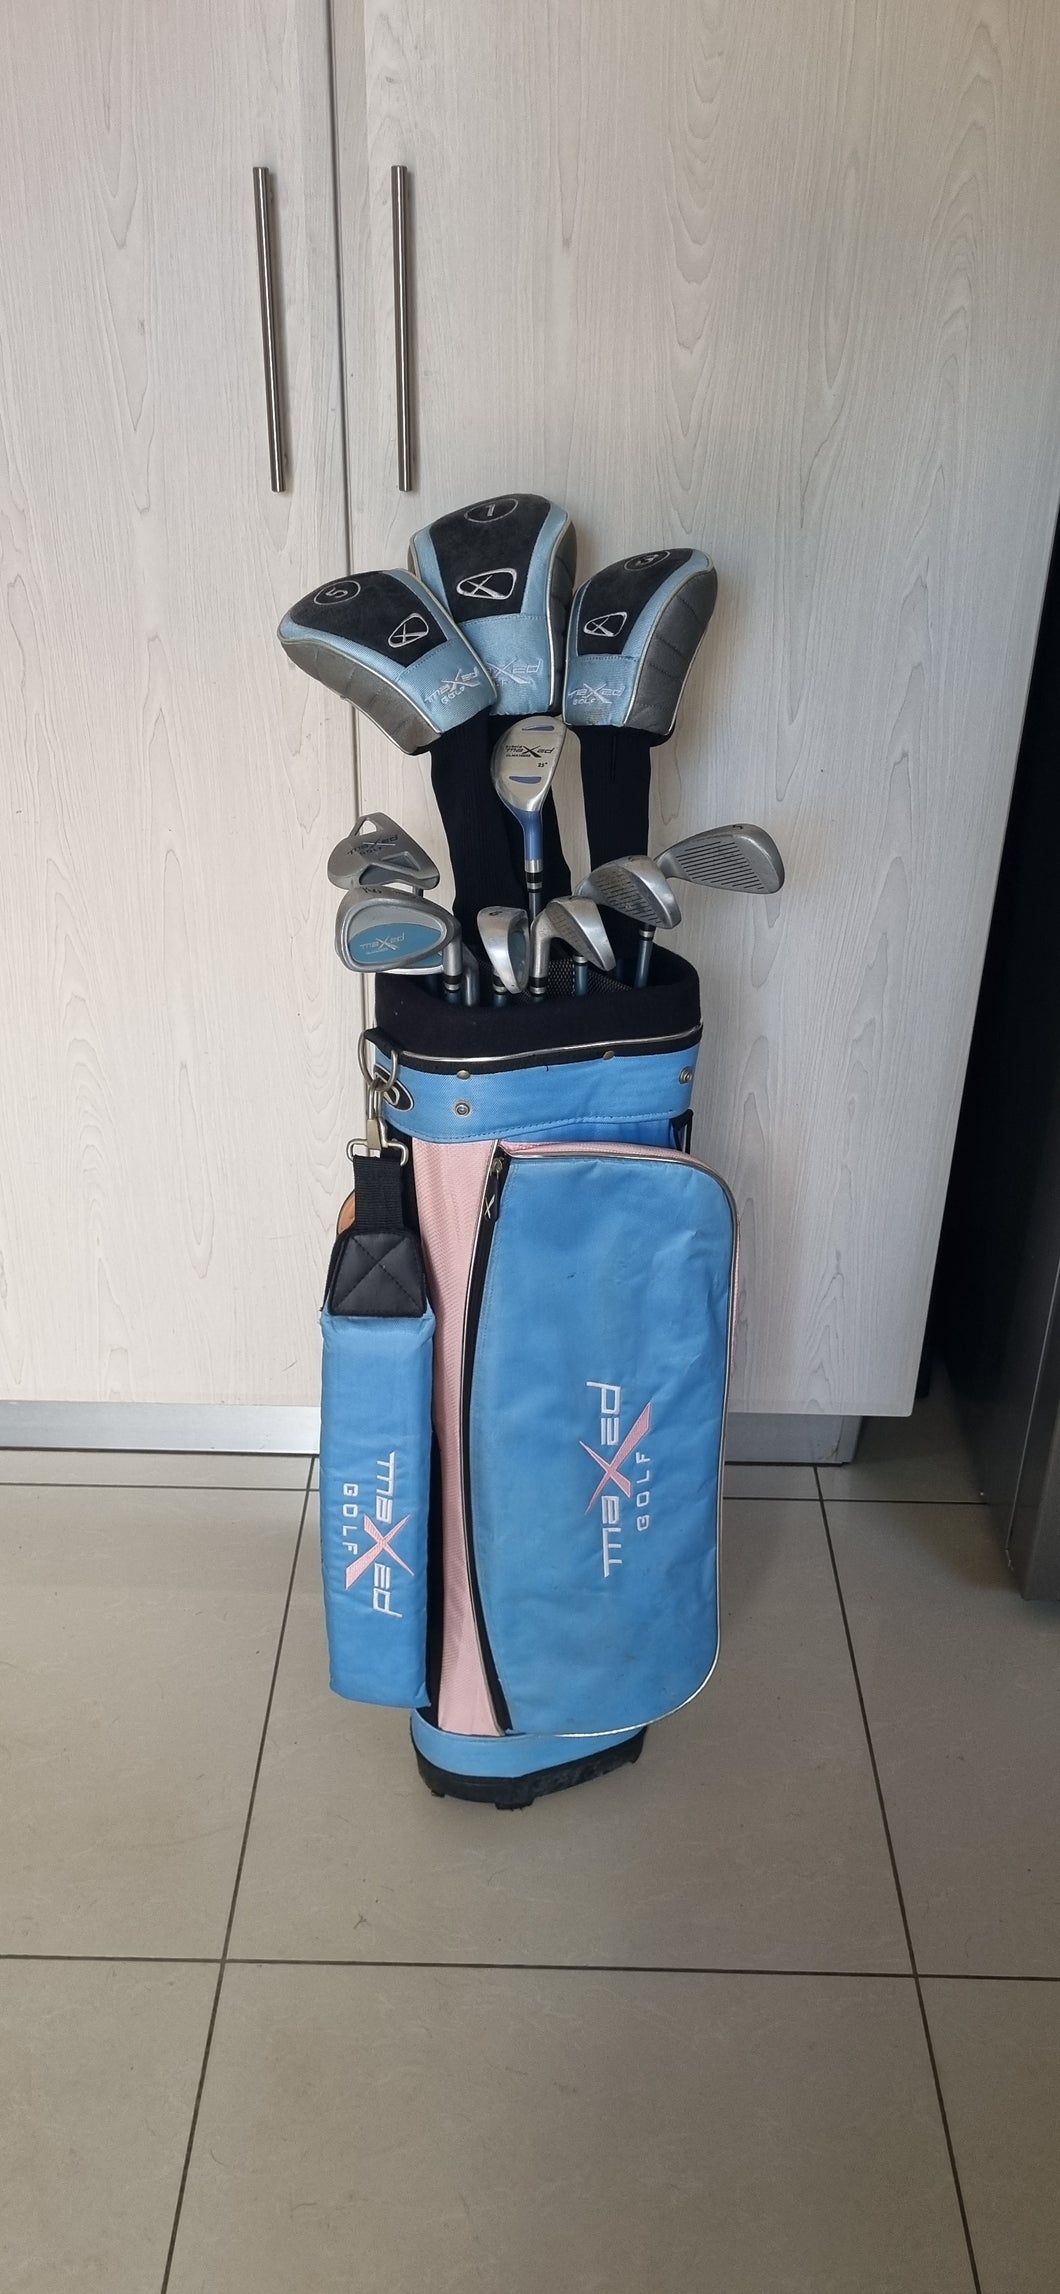 Maxed Ladies Full Golf Set with Bag and Covers